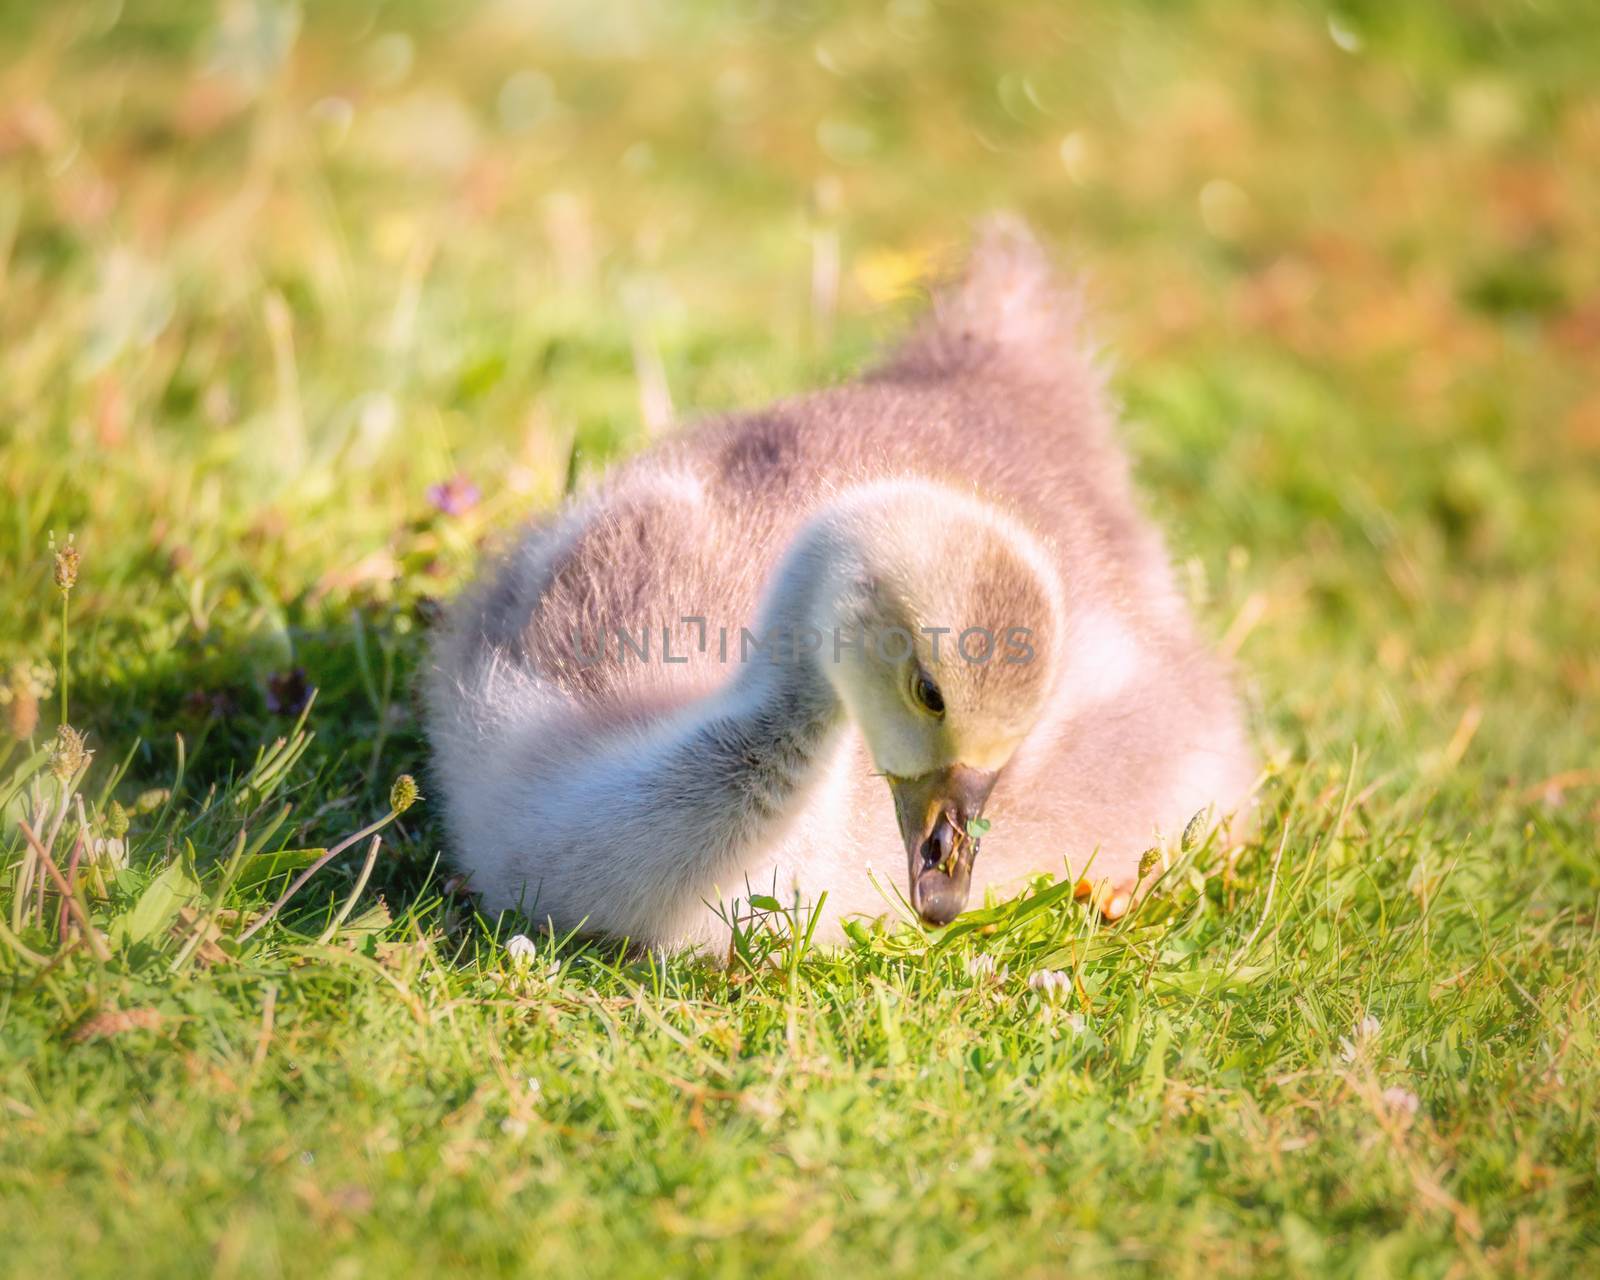 Gosling Chick Sitting in a Grassy Field by backyard_photography